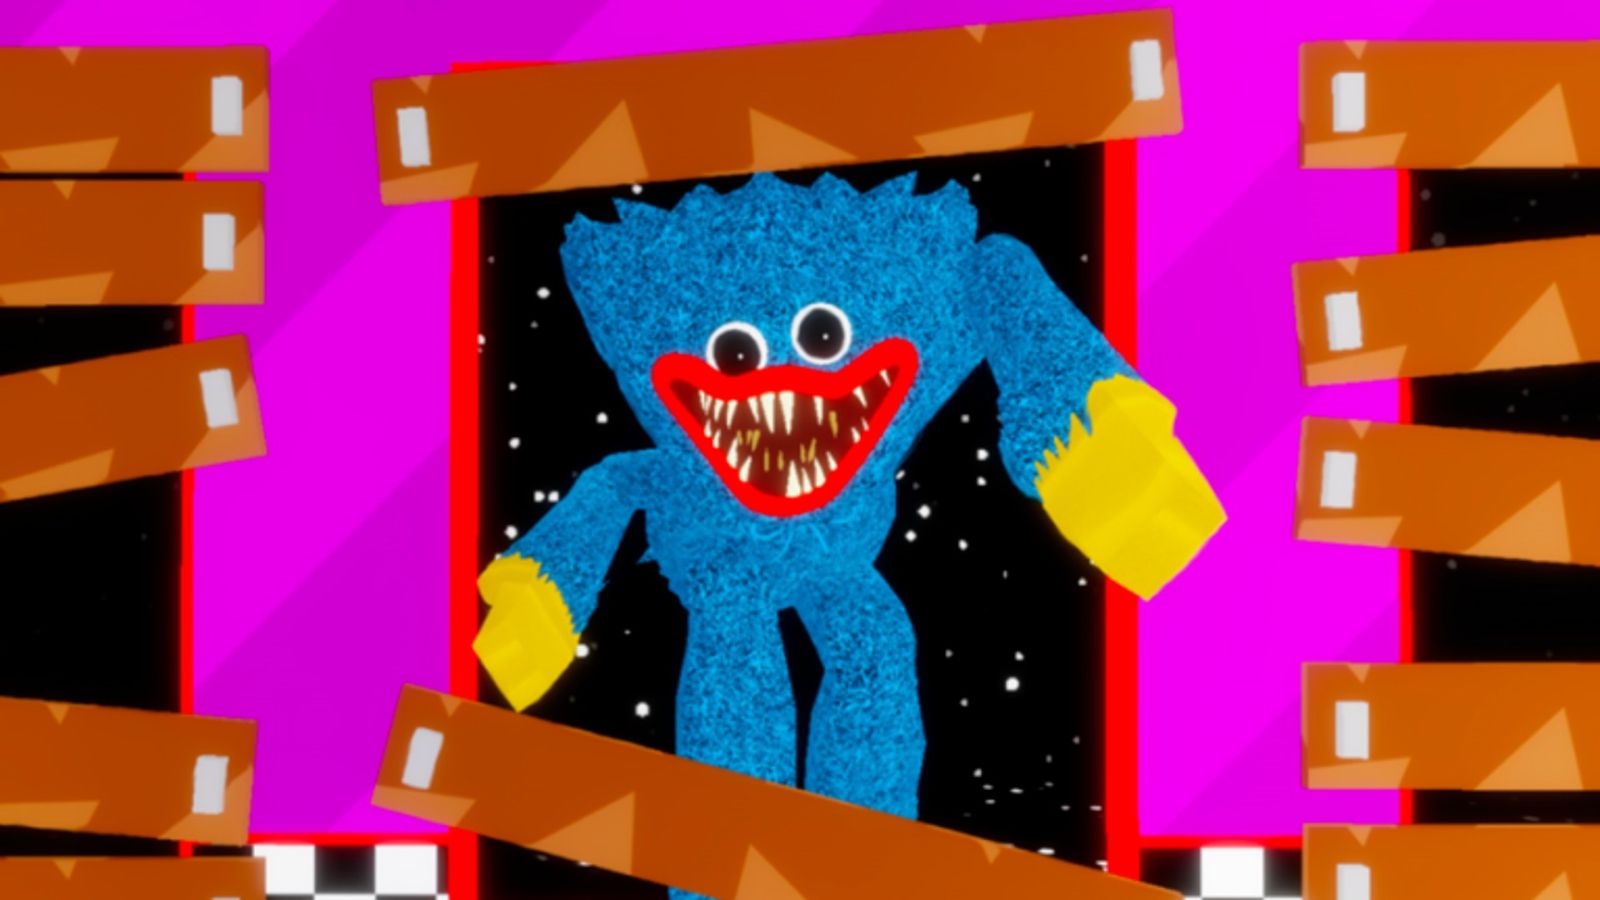 Screenshot from Scary Elevator, showing a horror monster crawling through an elevator shaft